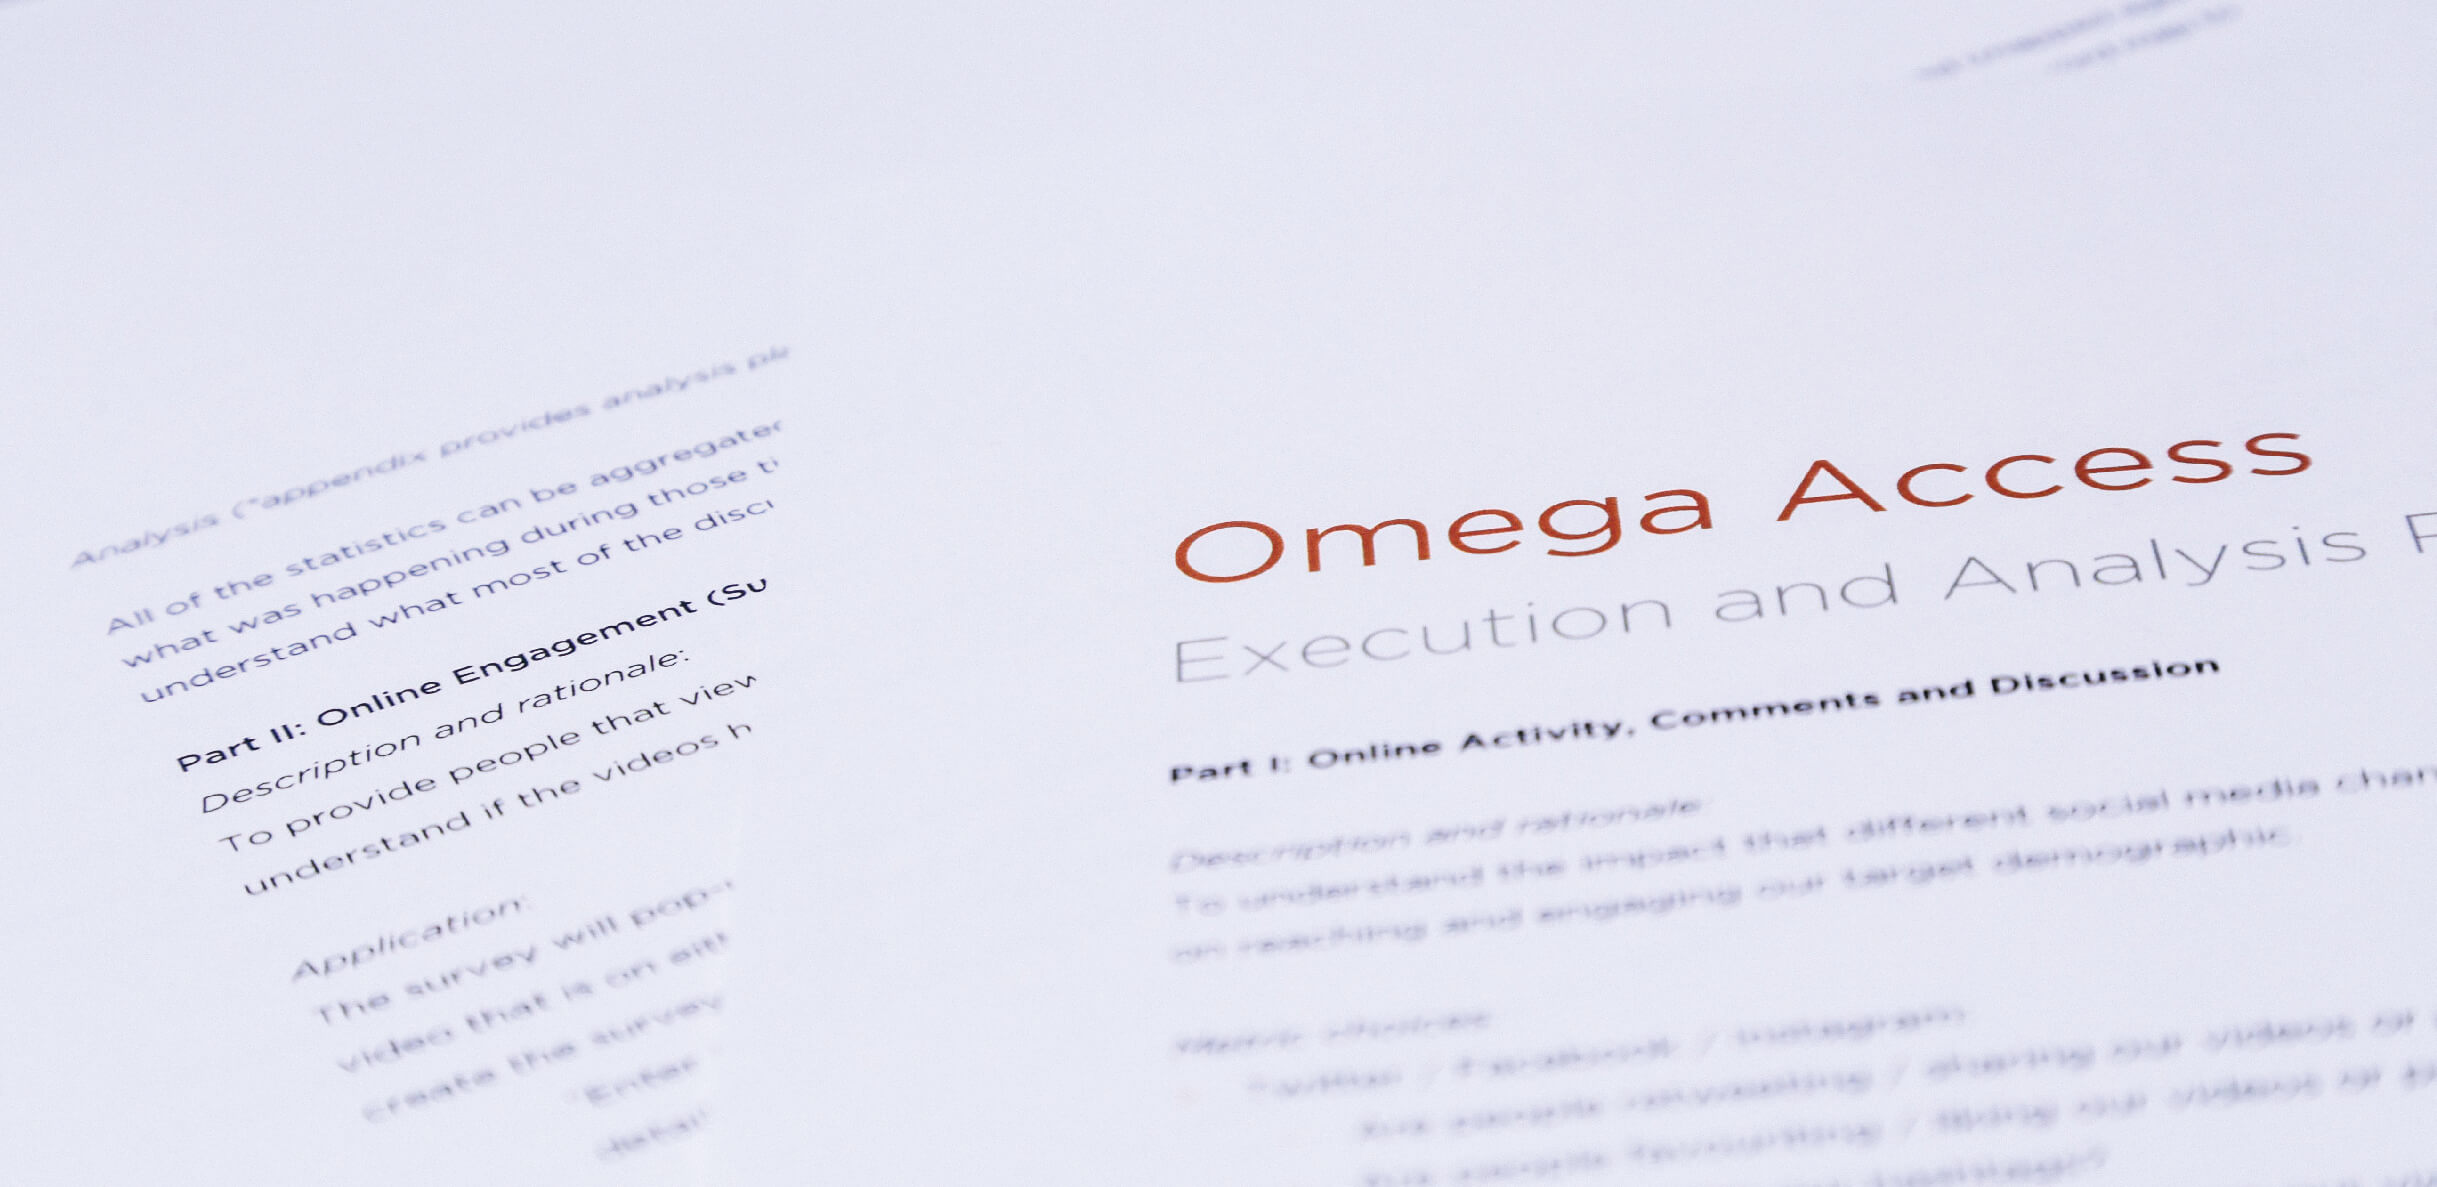 Omega Access Images-07